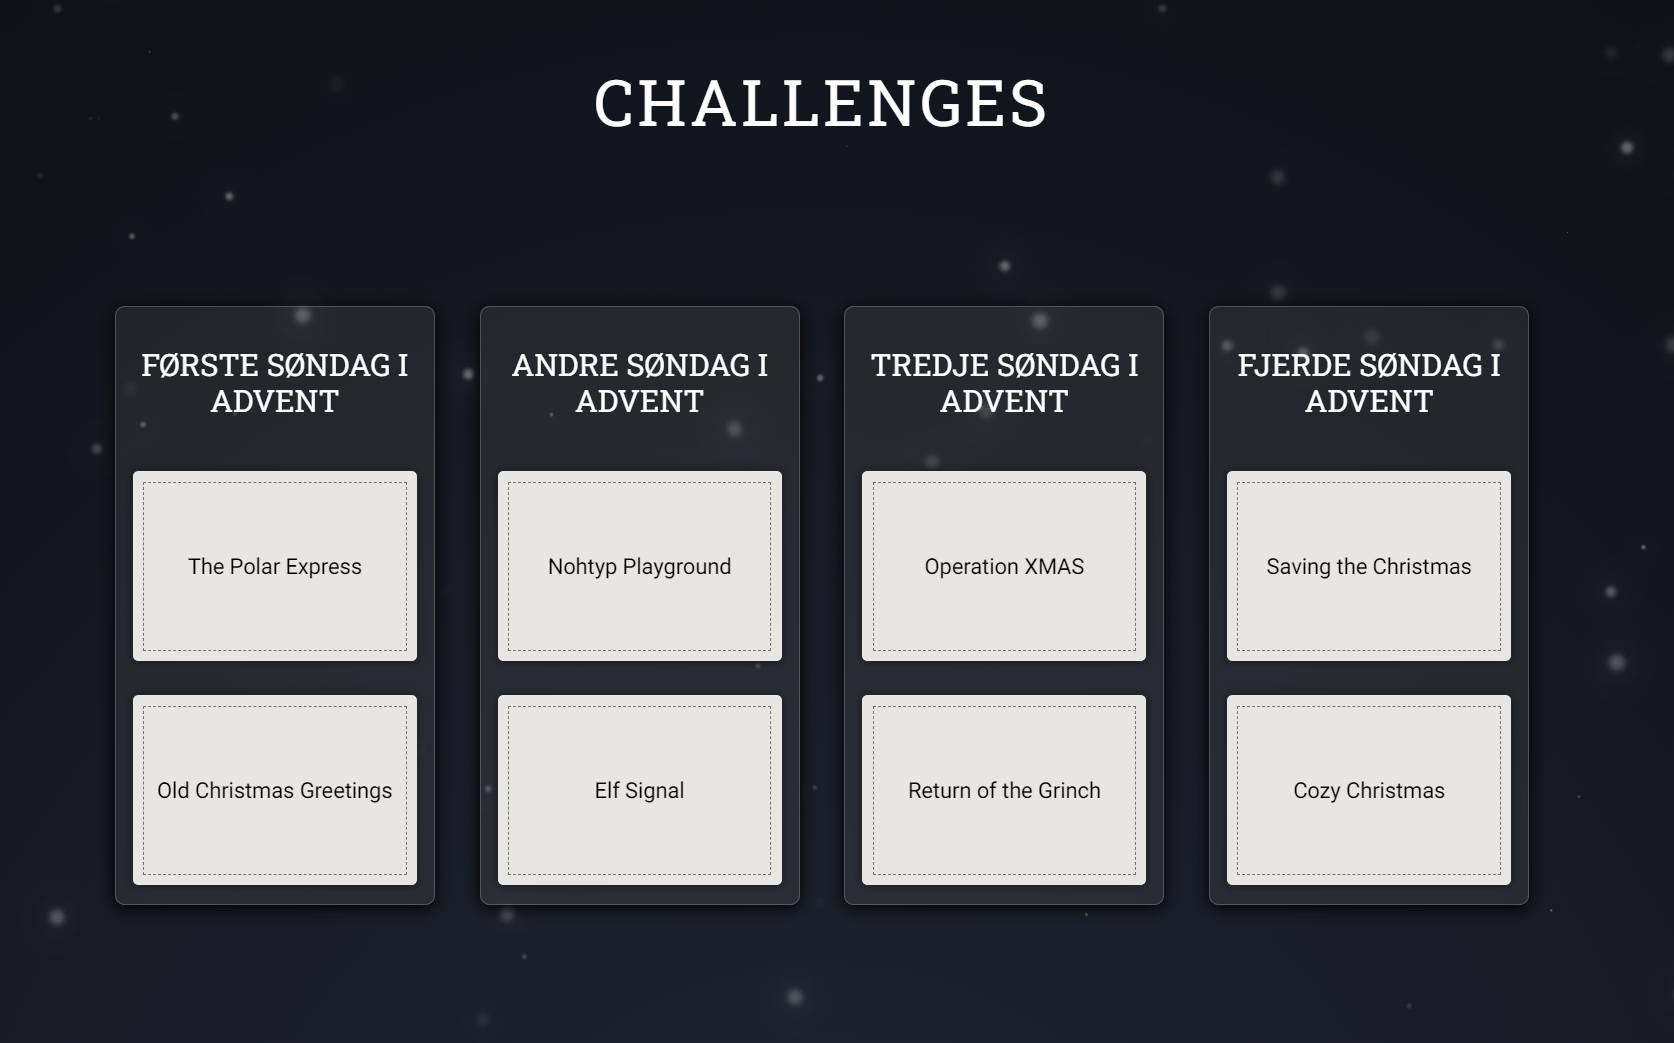 The list over all the challenges